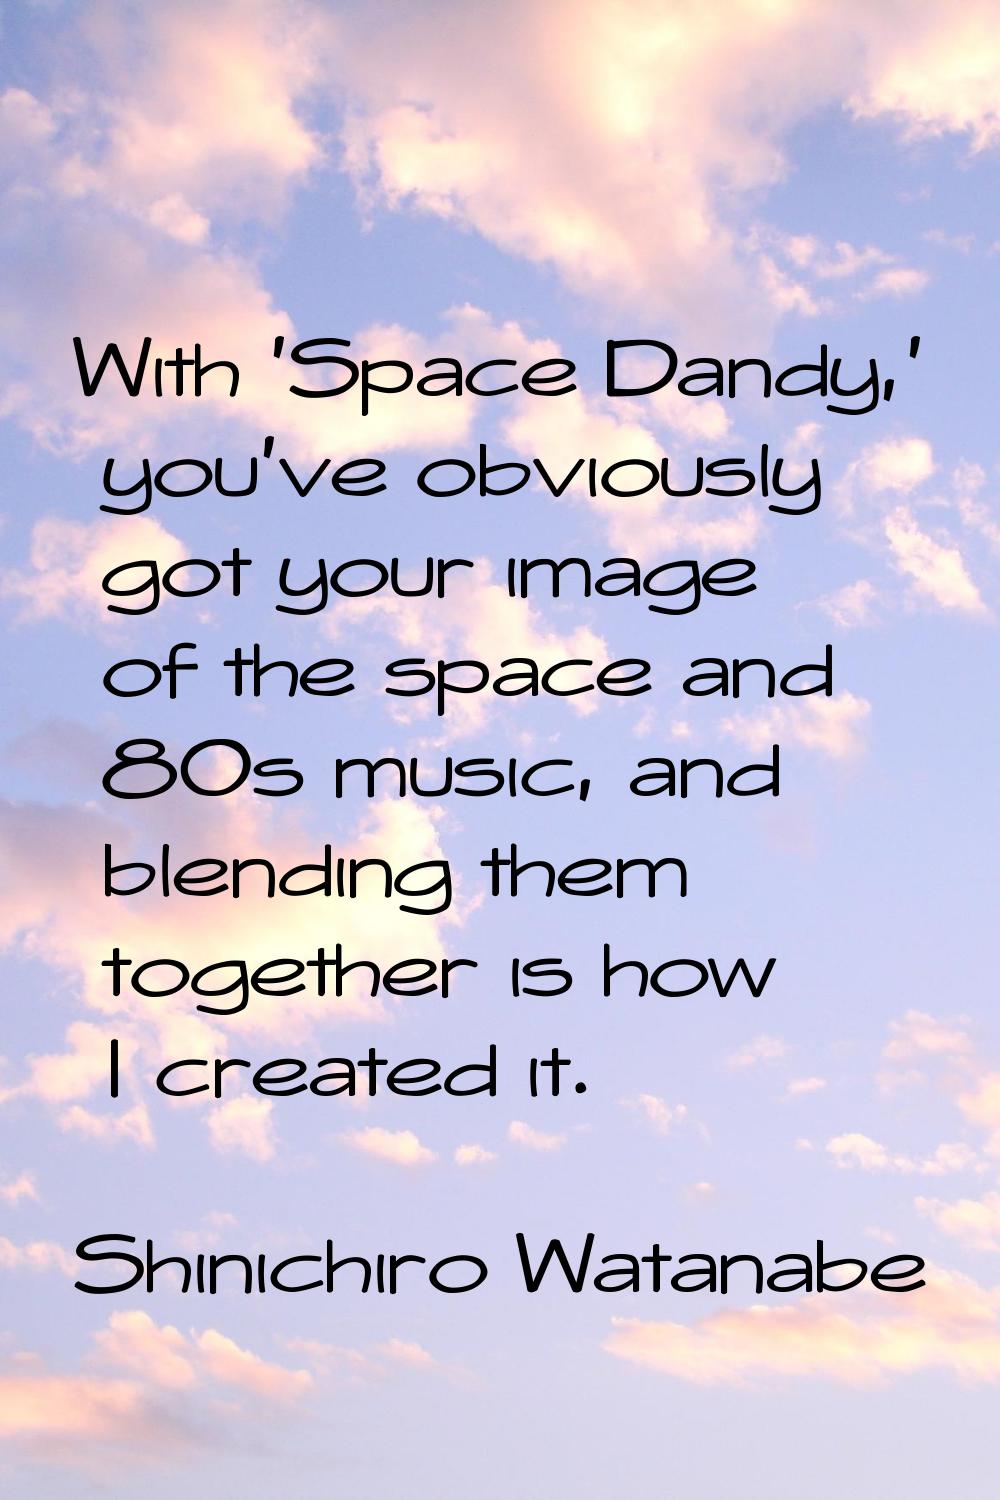 With 'Space Dandy,' you've obviously got your image of the space and 80s music, and blending them t